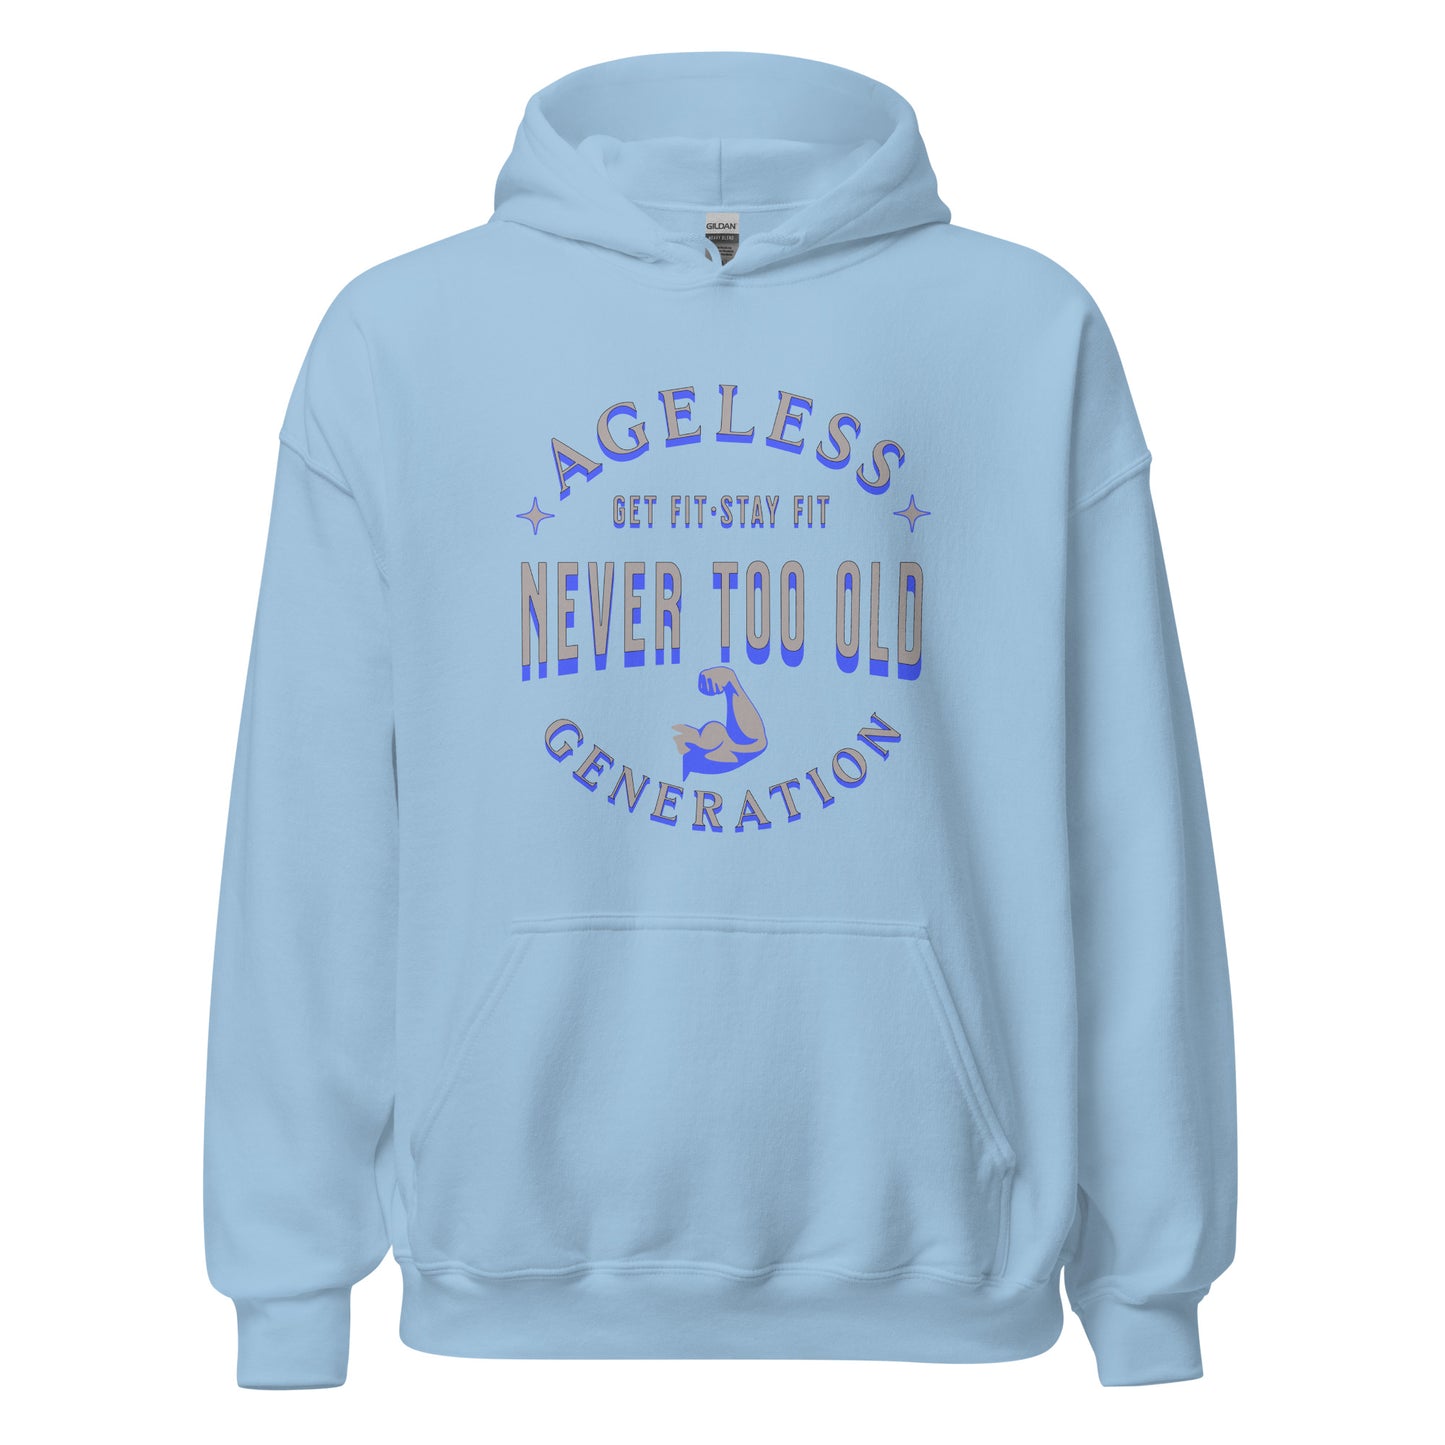 Ageless Generation: Never Too Old Unisex Hoodie